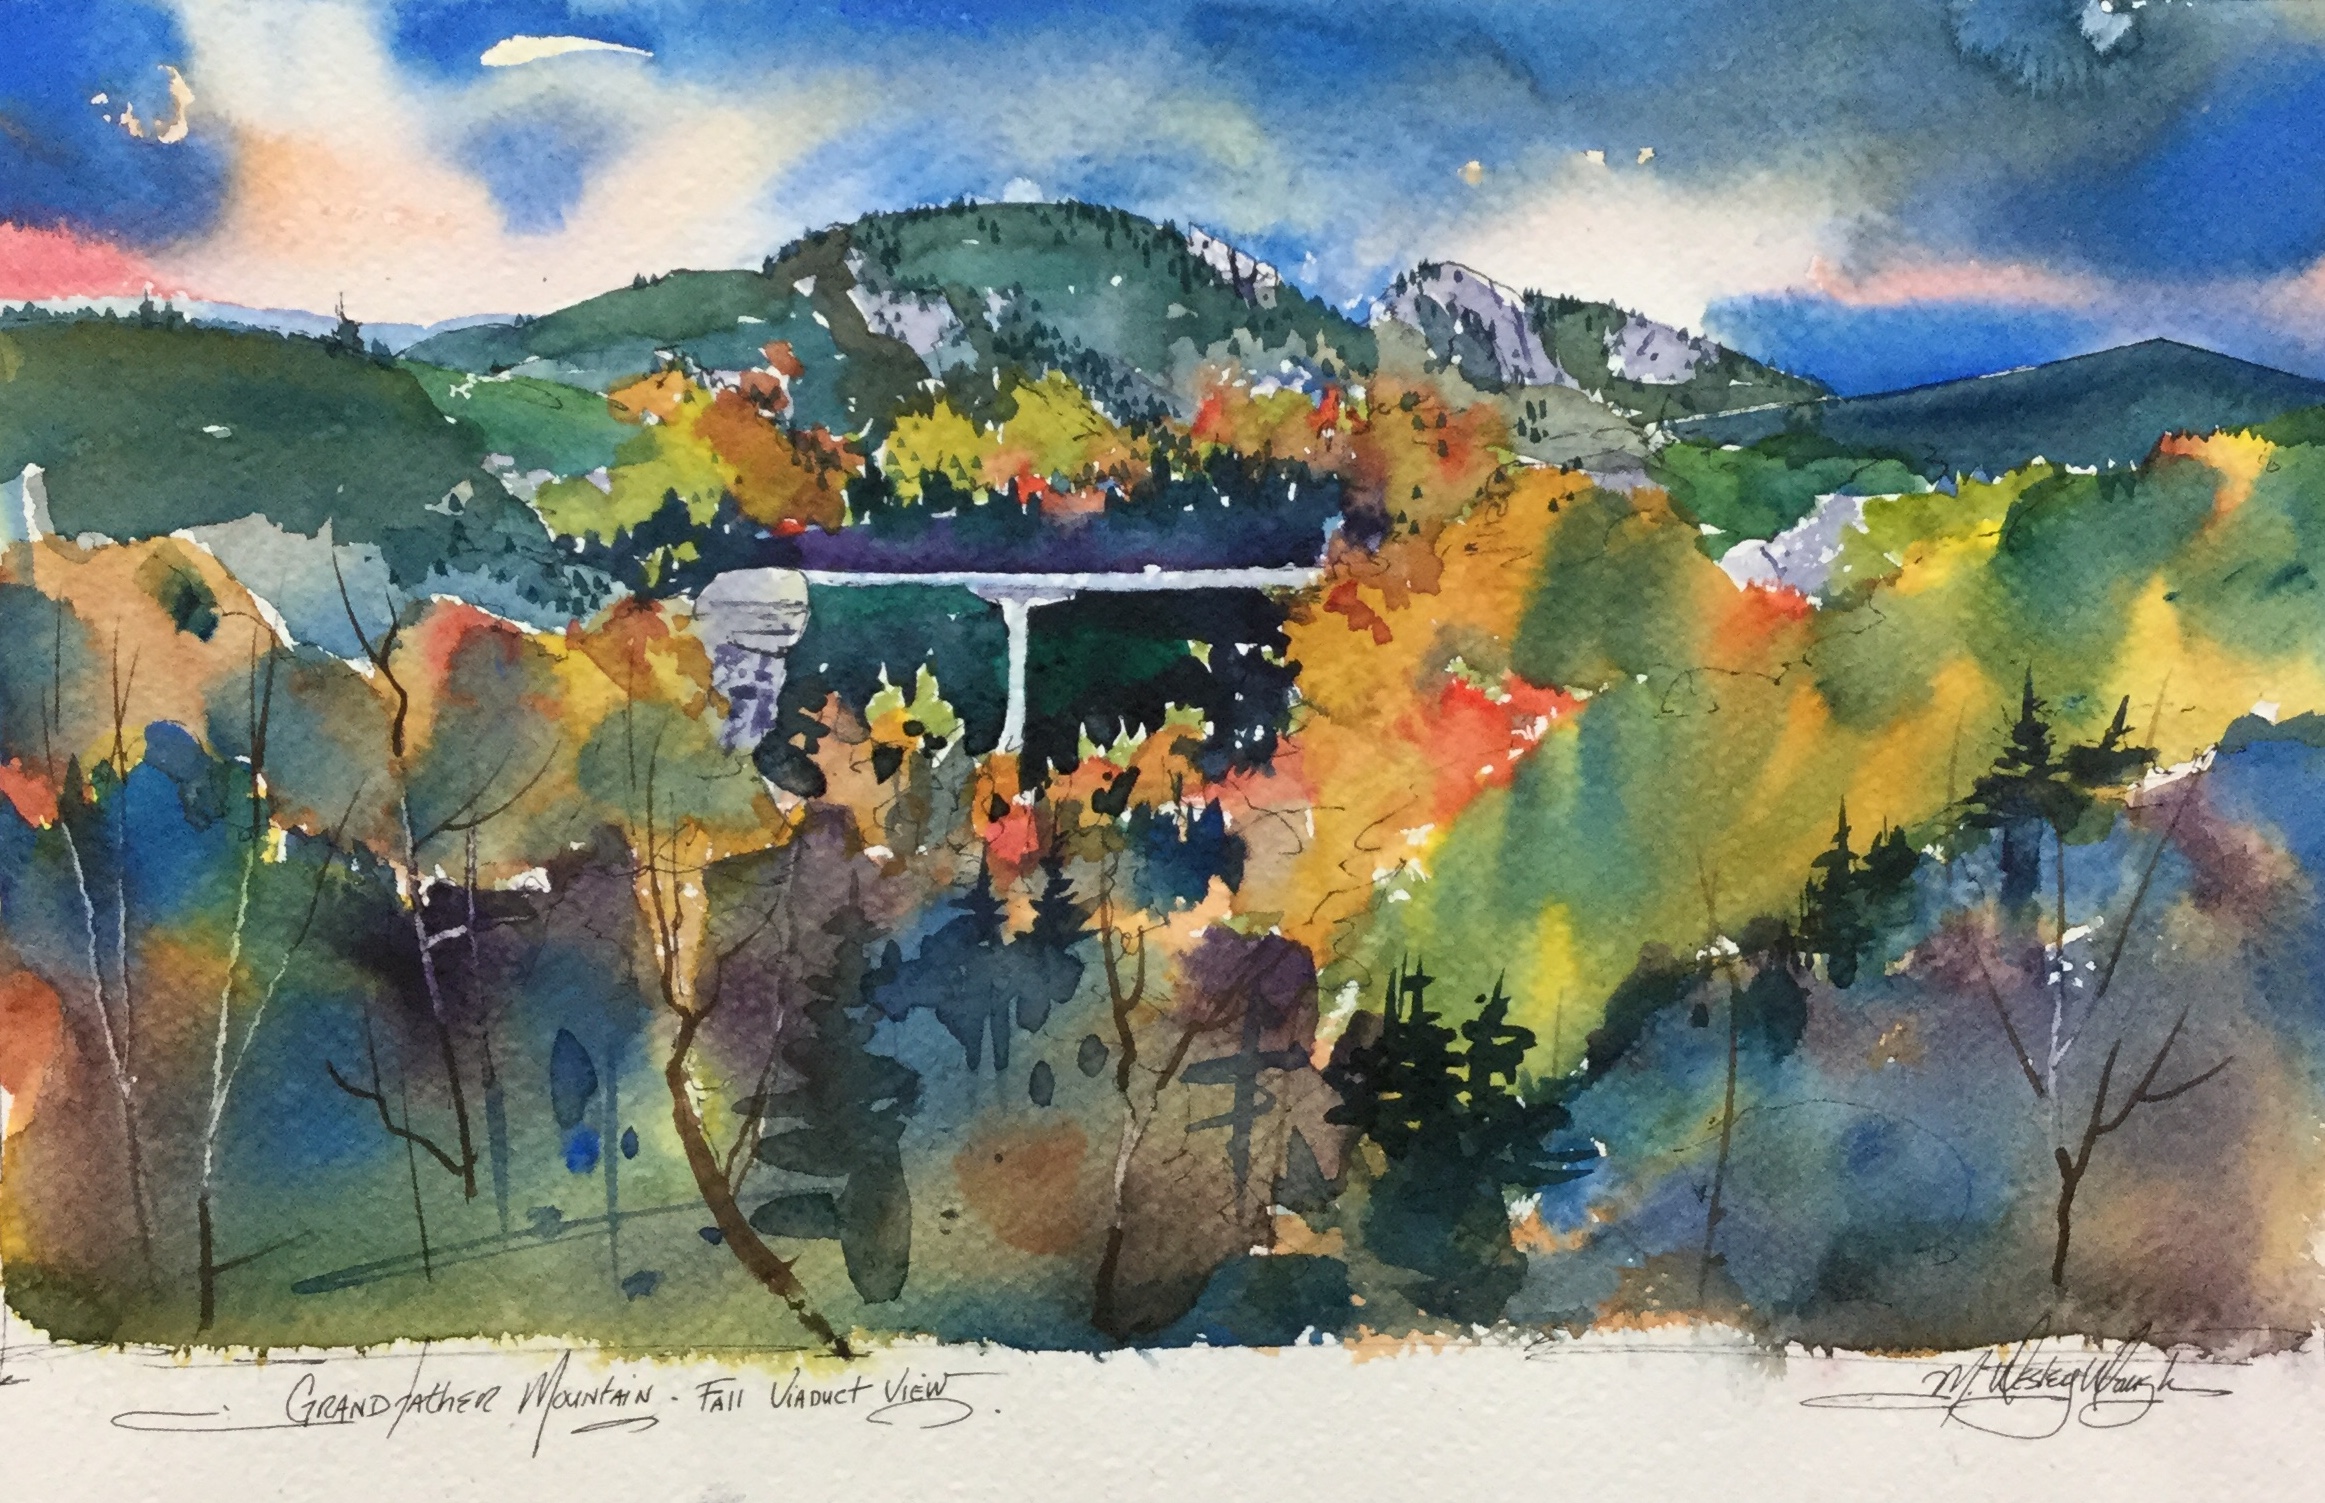 Grandfather Mountain Fall Viaduct View SOLD